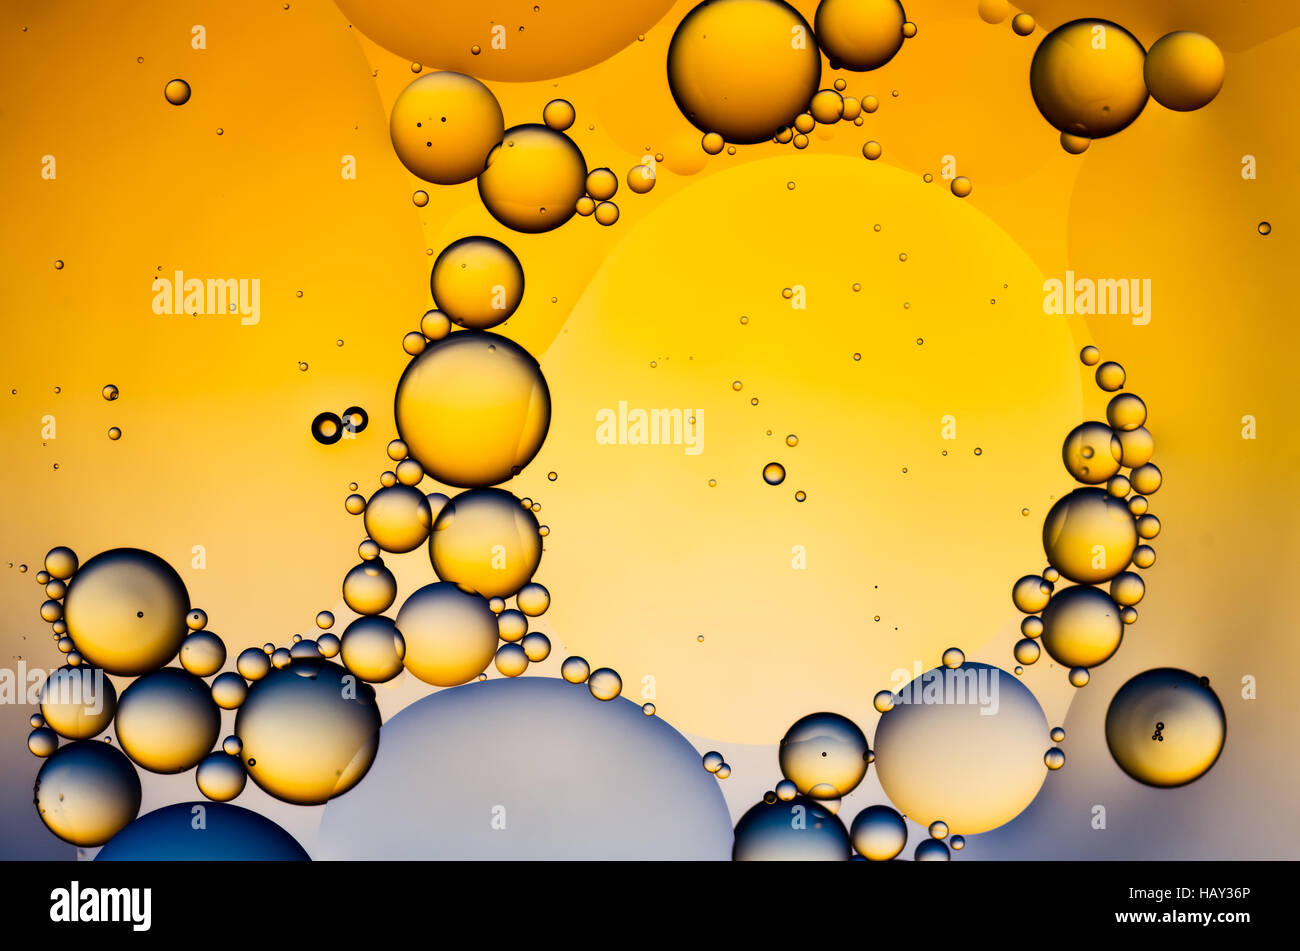 Complementary colors oil drops on water Stock Photo